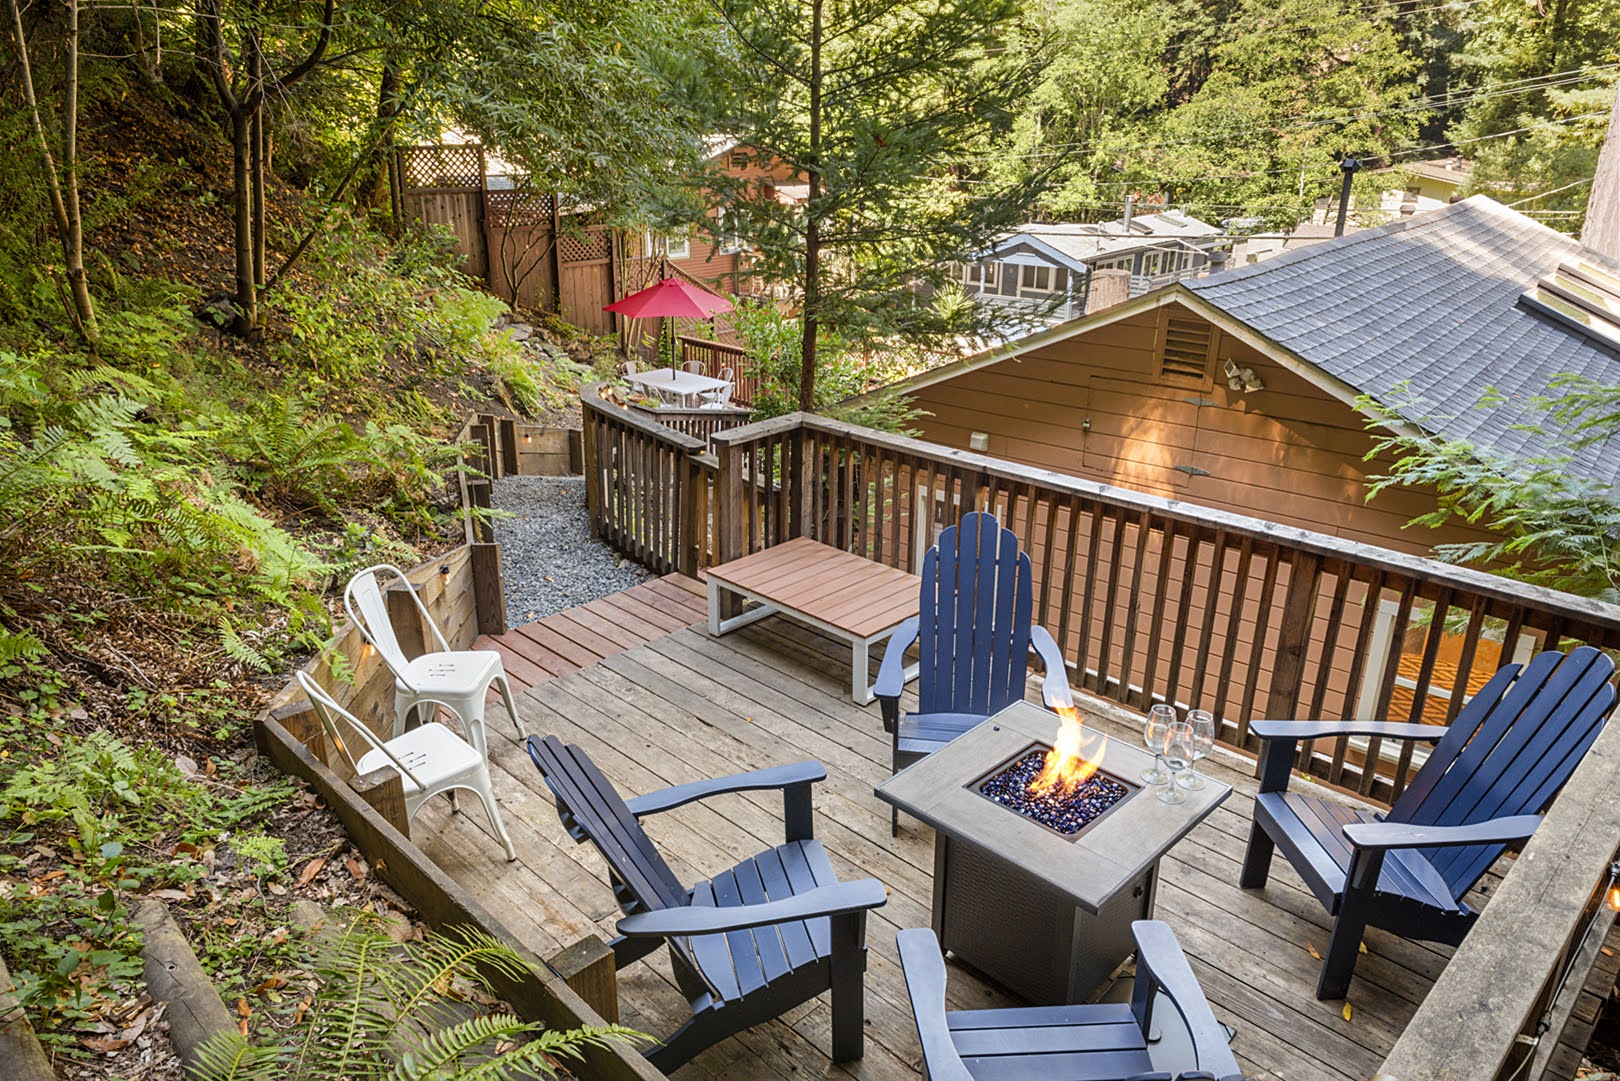 Hang out at the upper deck and firepit.